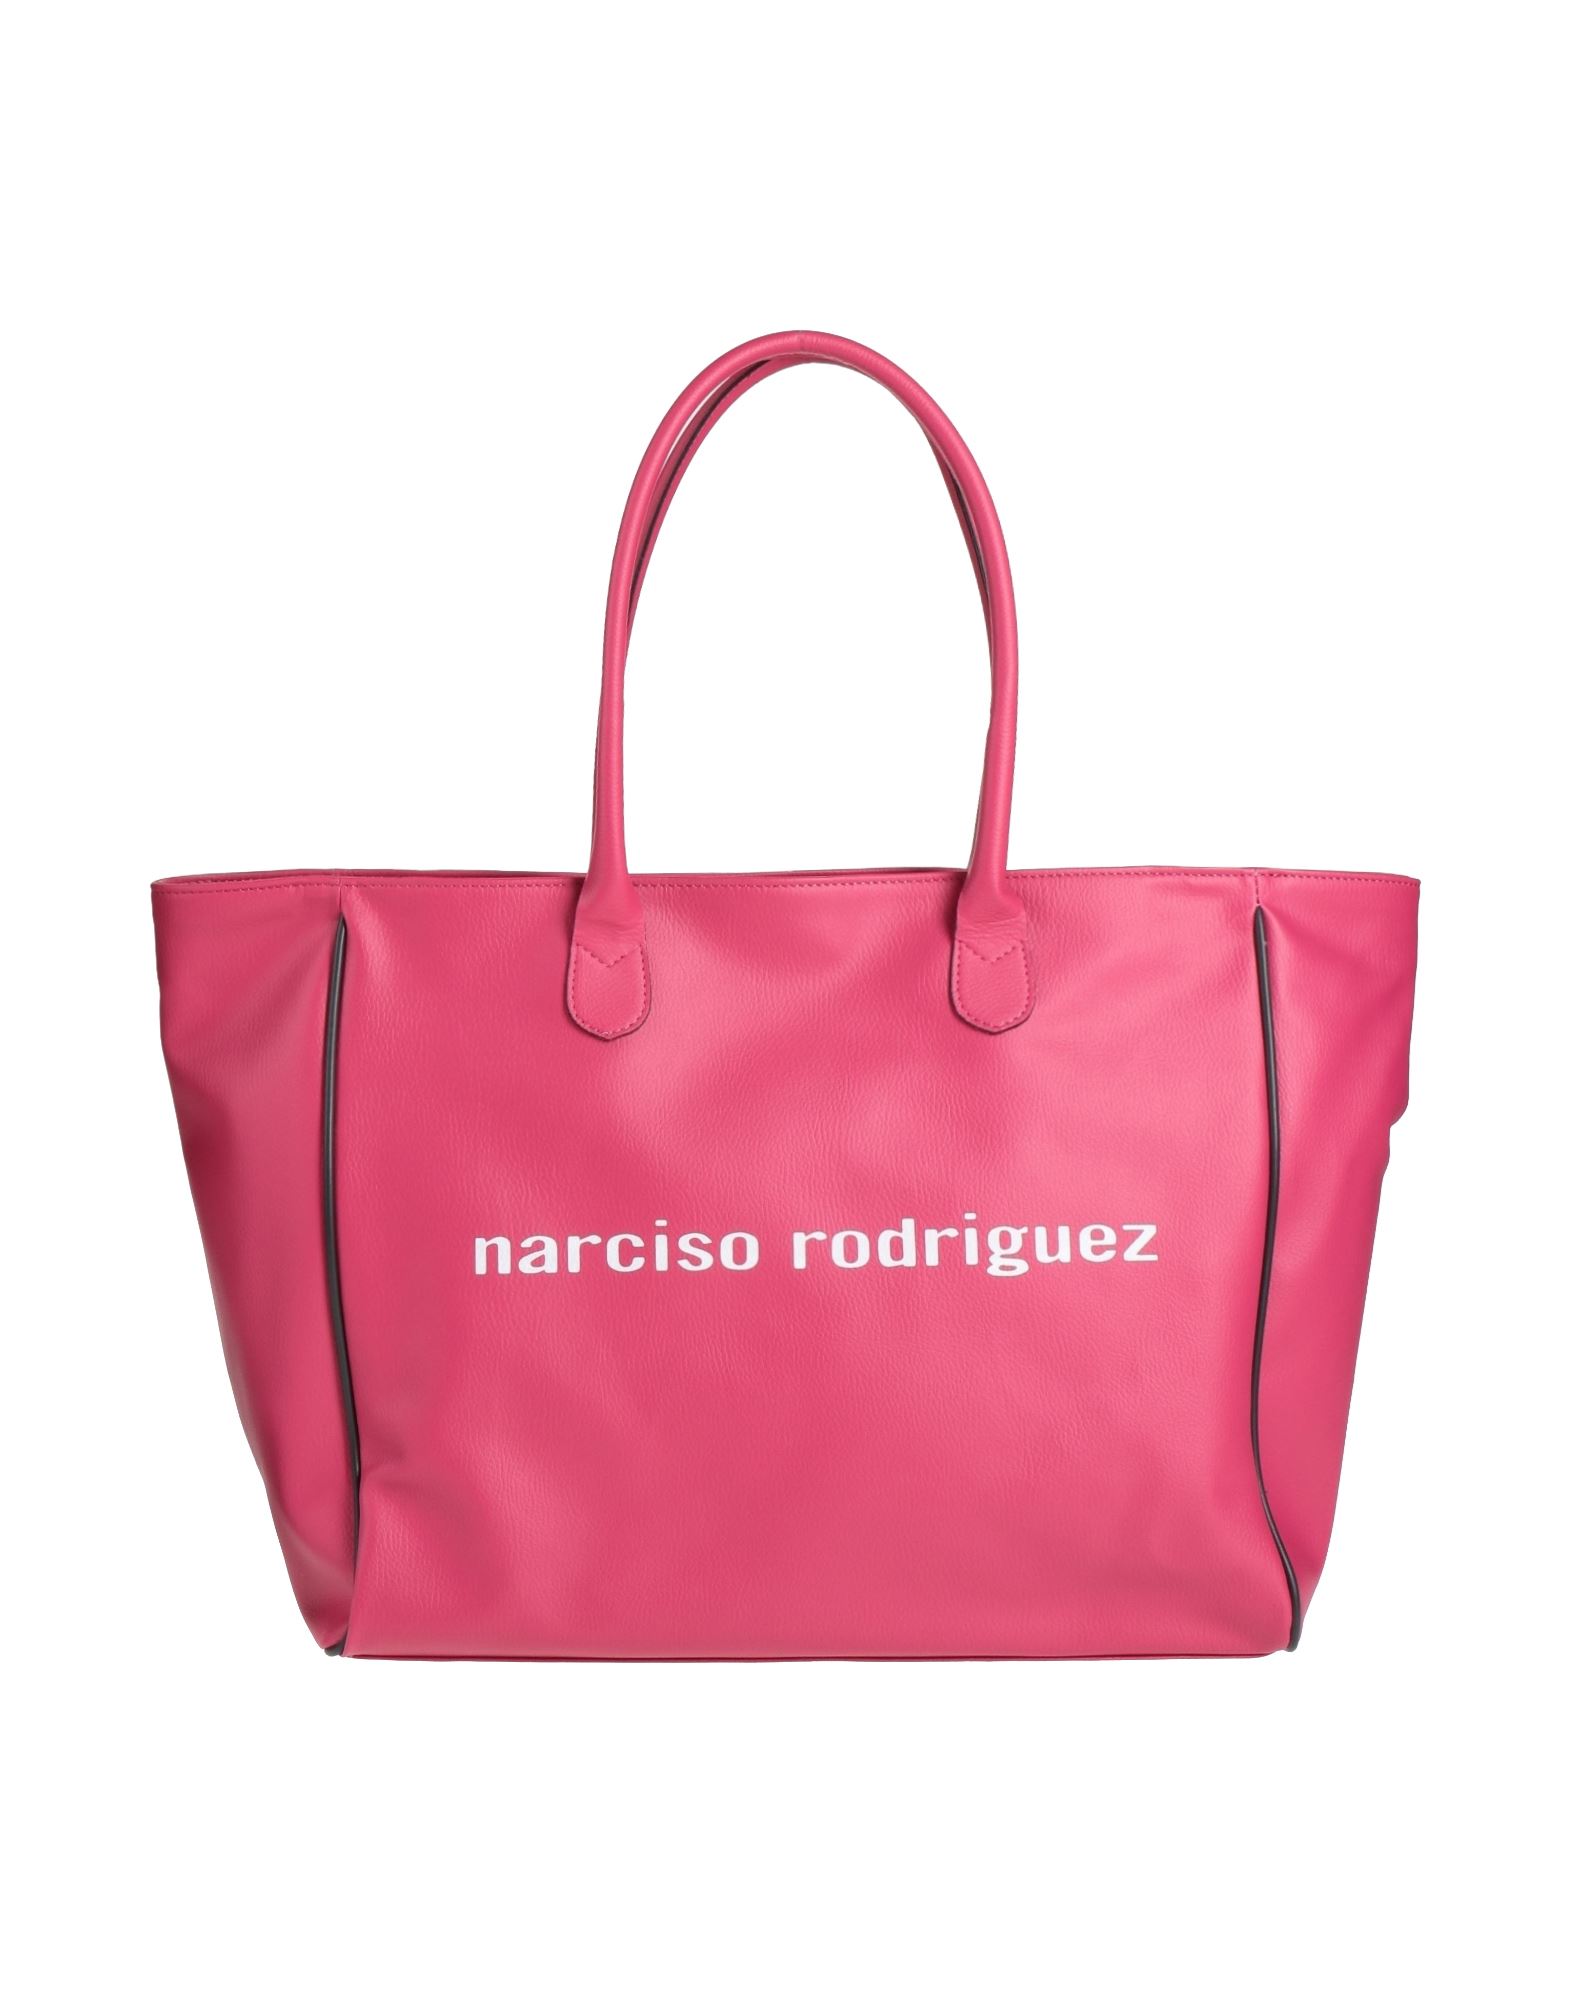 Narciso Rodriguez Handbags In Red